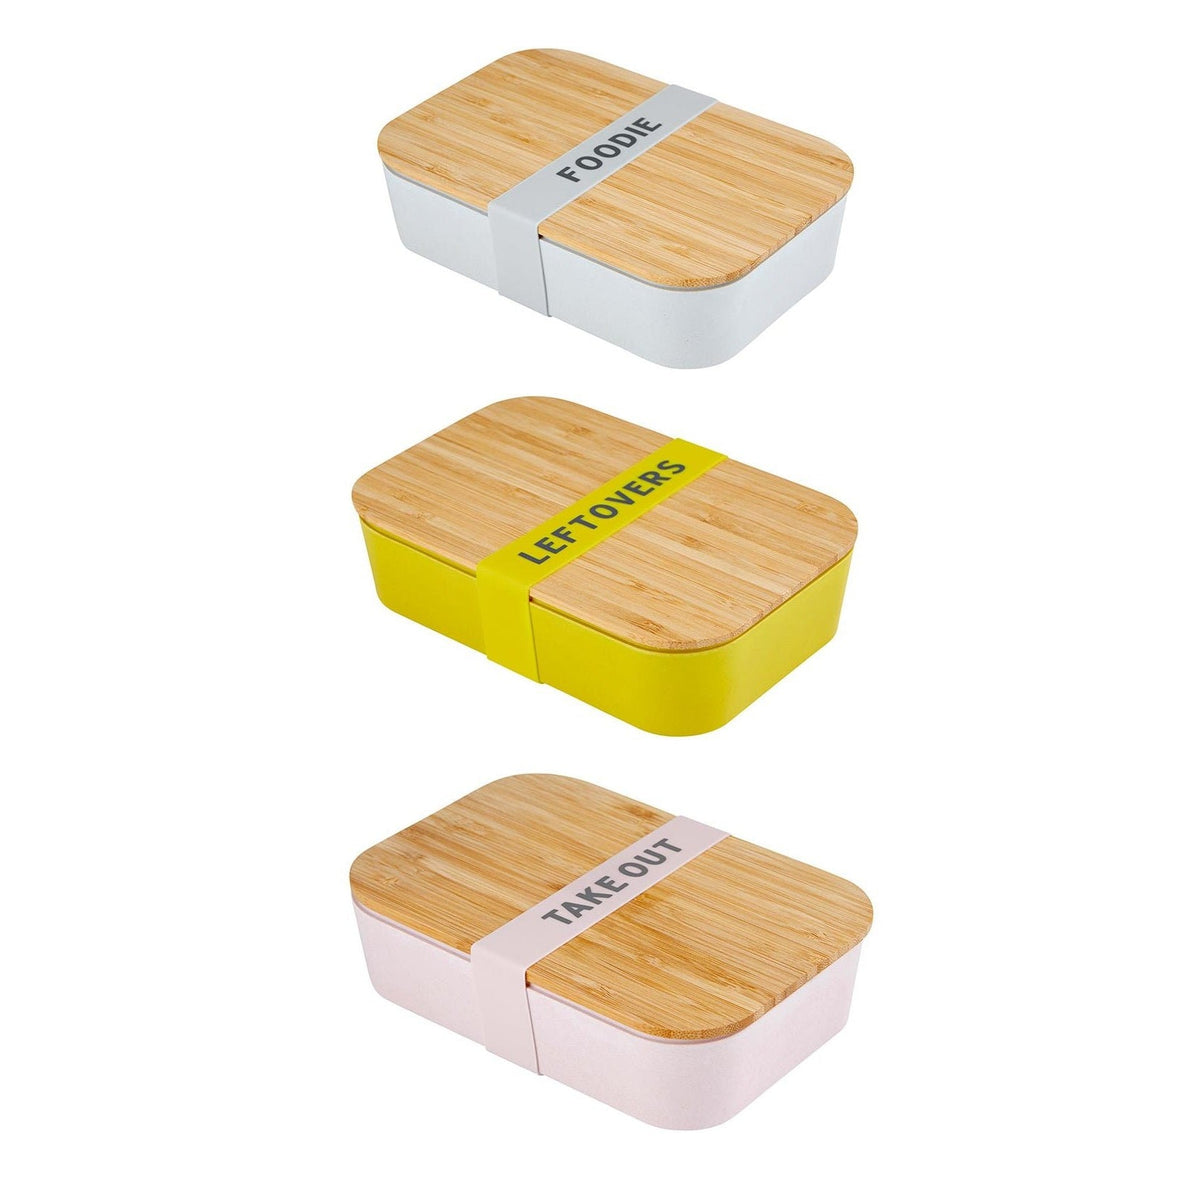 Bamboo Lunch Box 3 Pack for Meal Prep by The Bullish Store